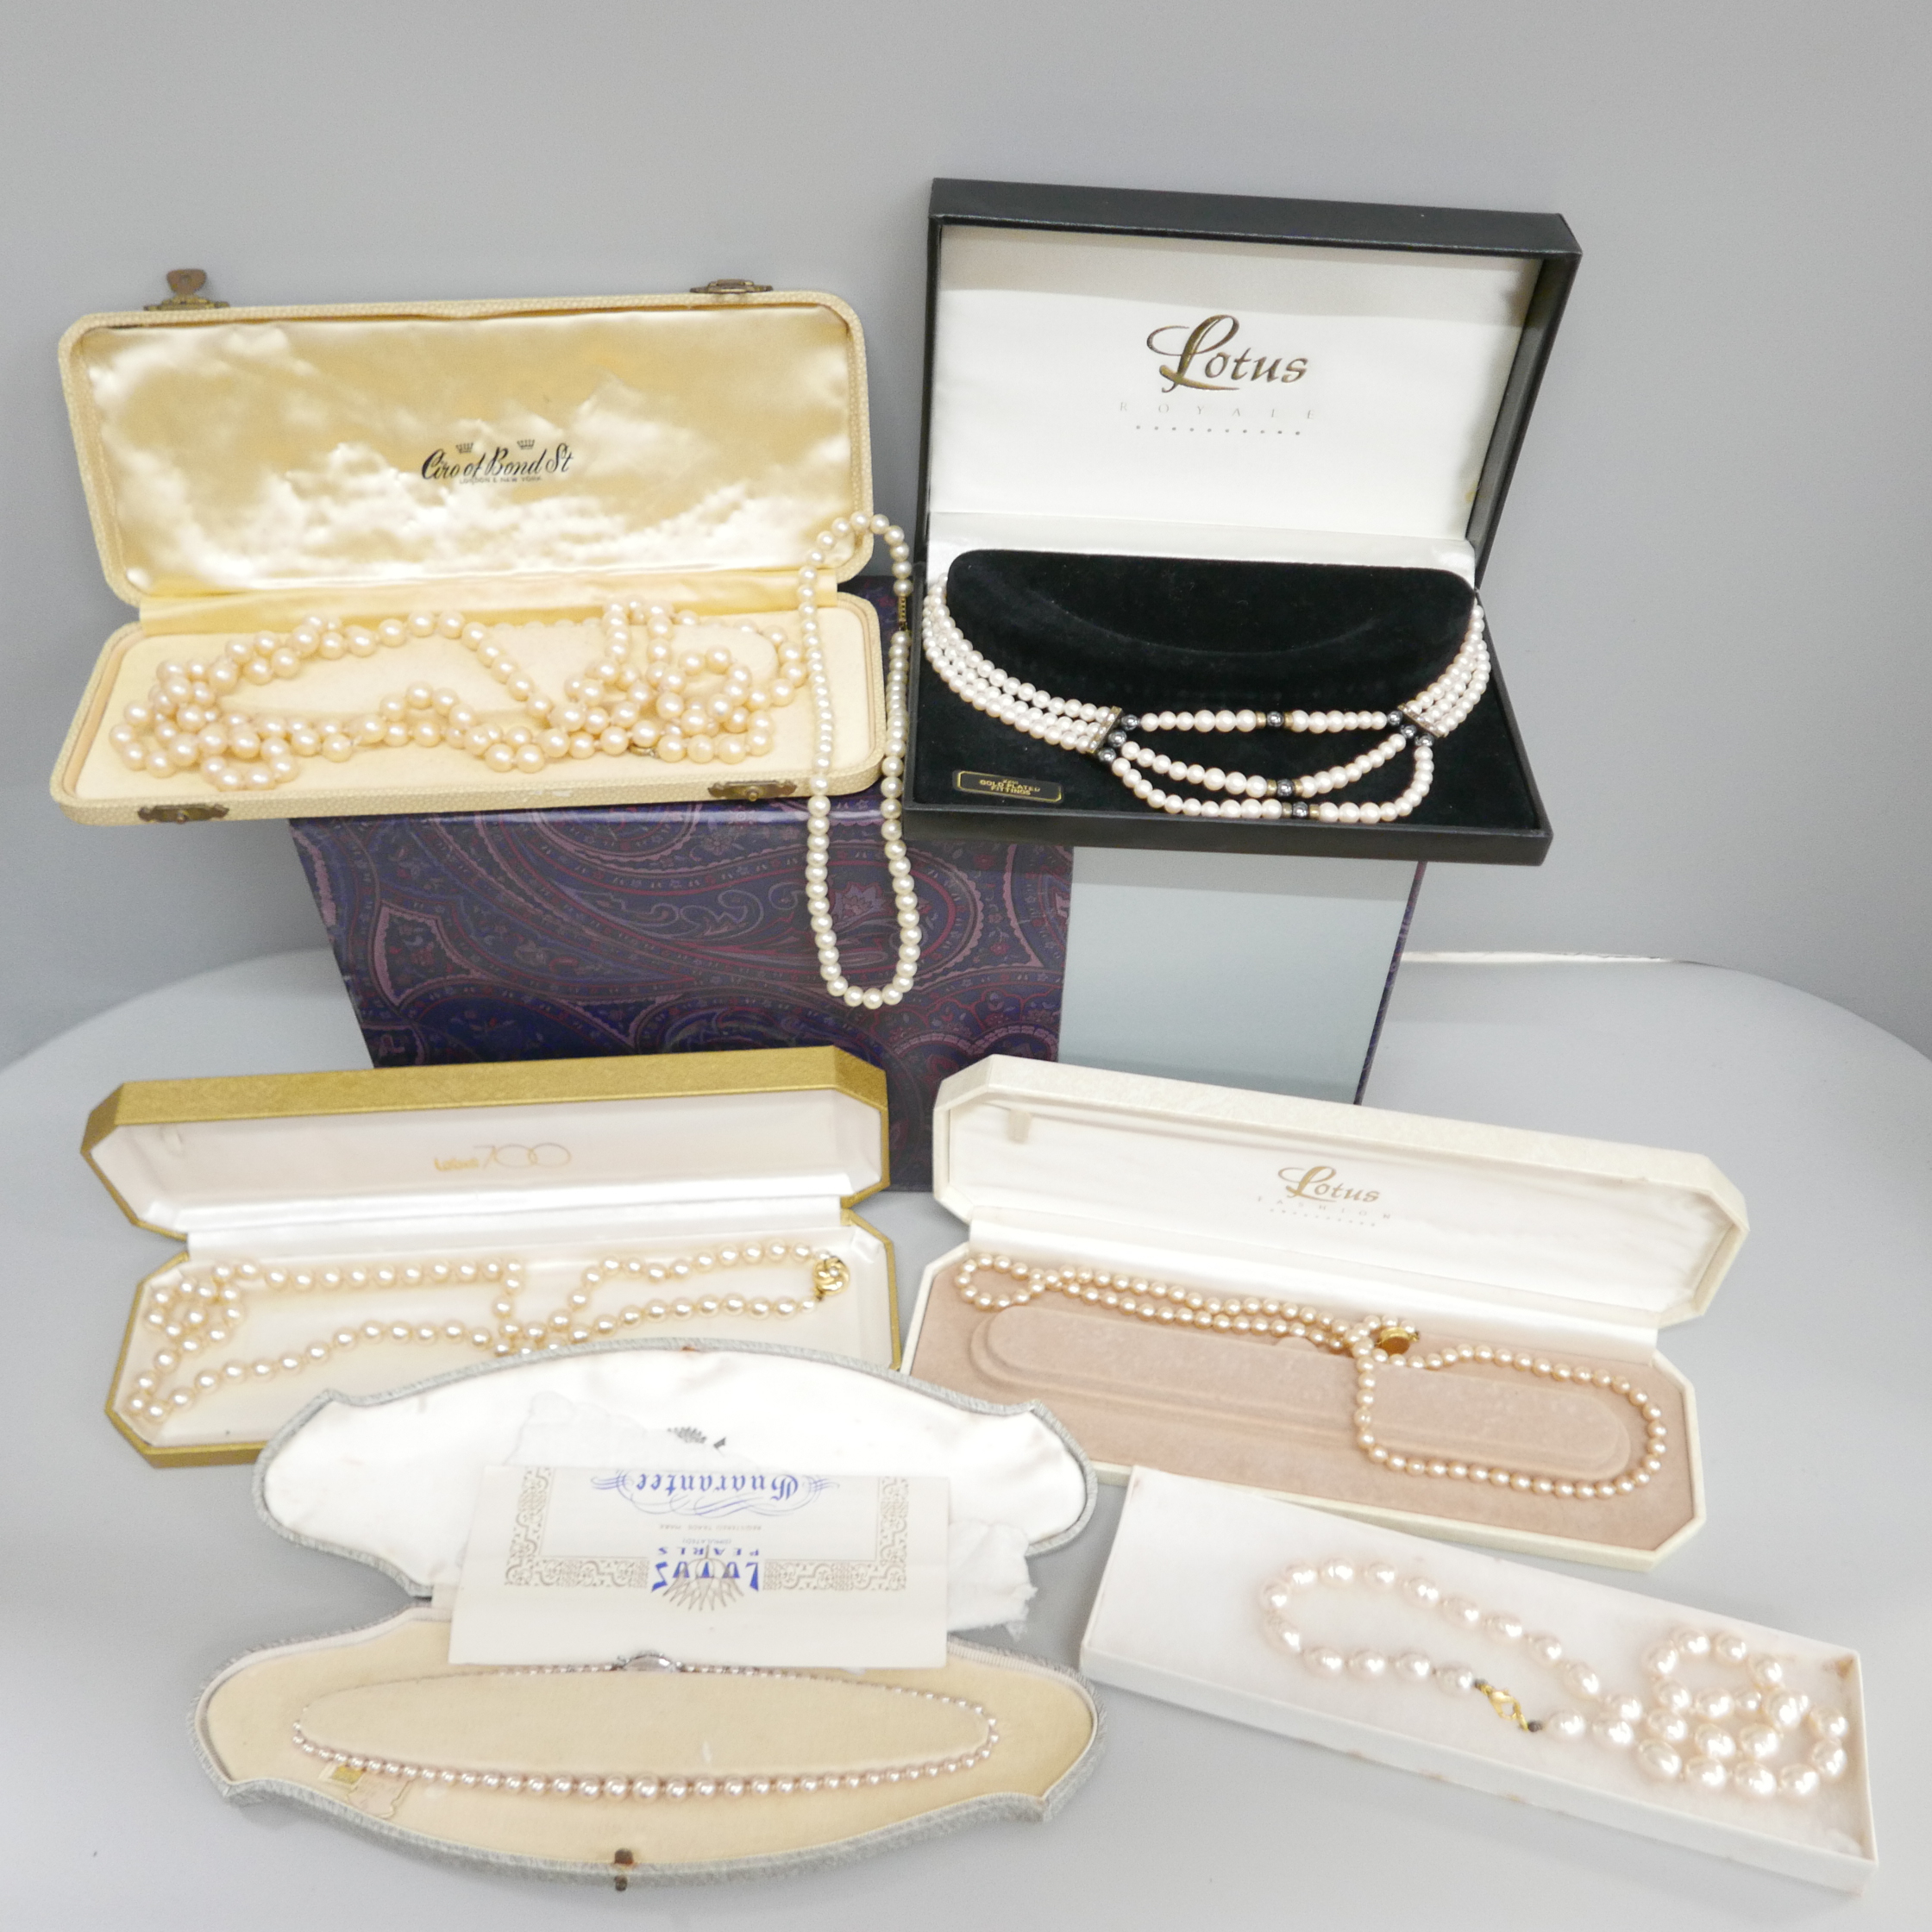 Boxed pearls including Lotus and silver mounted - Image 2 of 6